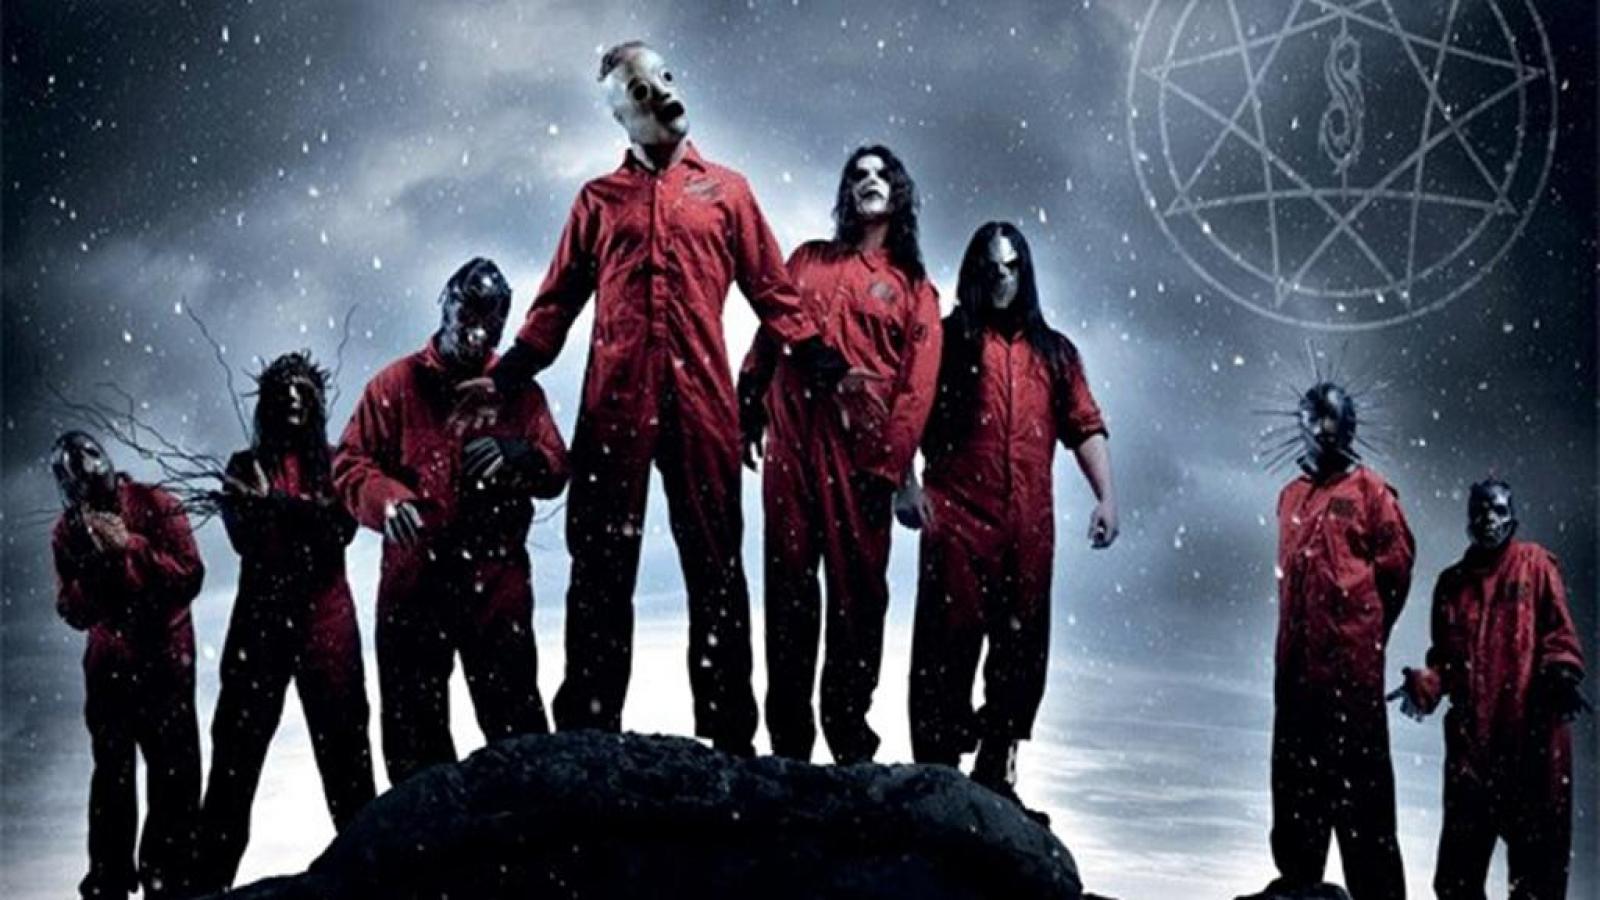 Slipknot - (#97545) - High Quality and Resolution Wallpapers on ...